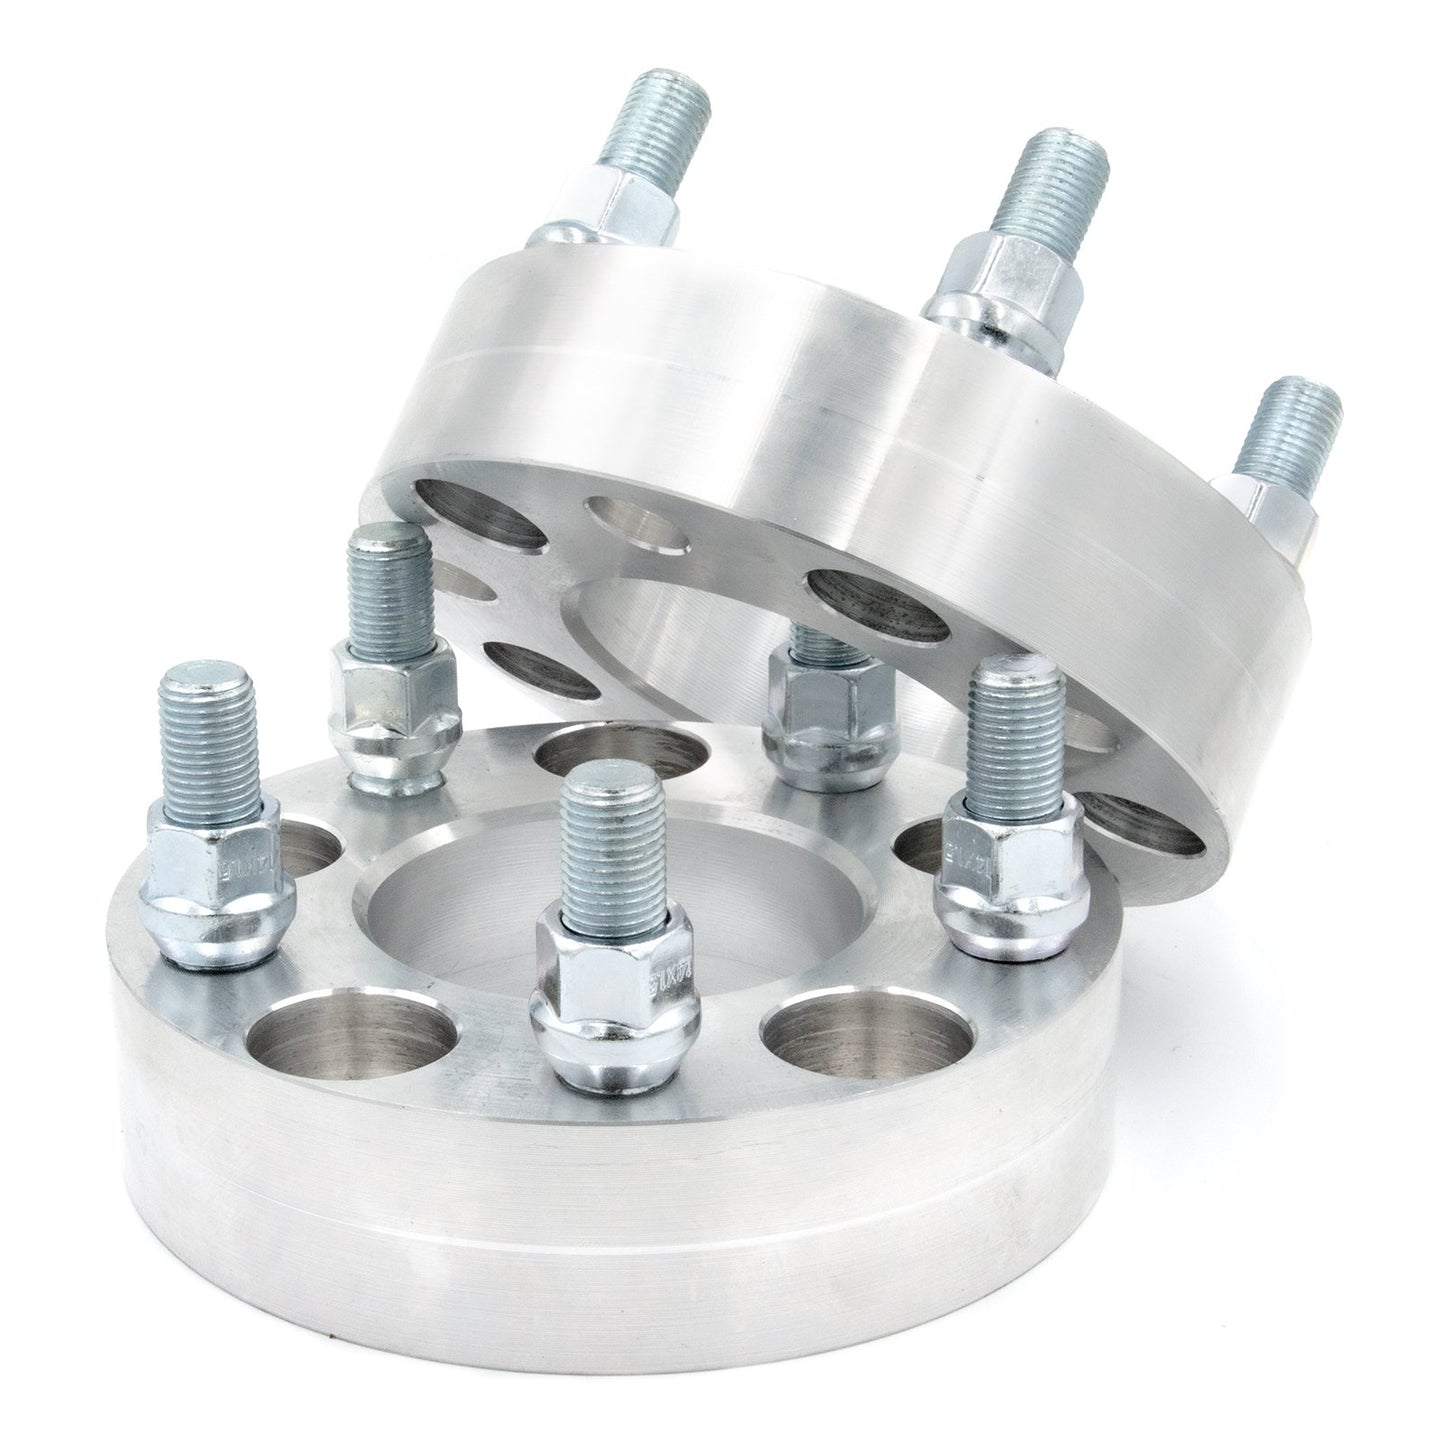 5x4.5" to 5x150 Wheel Spacer/Adapter - Thickness: 3/4"- 4"